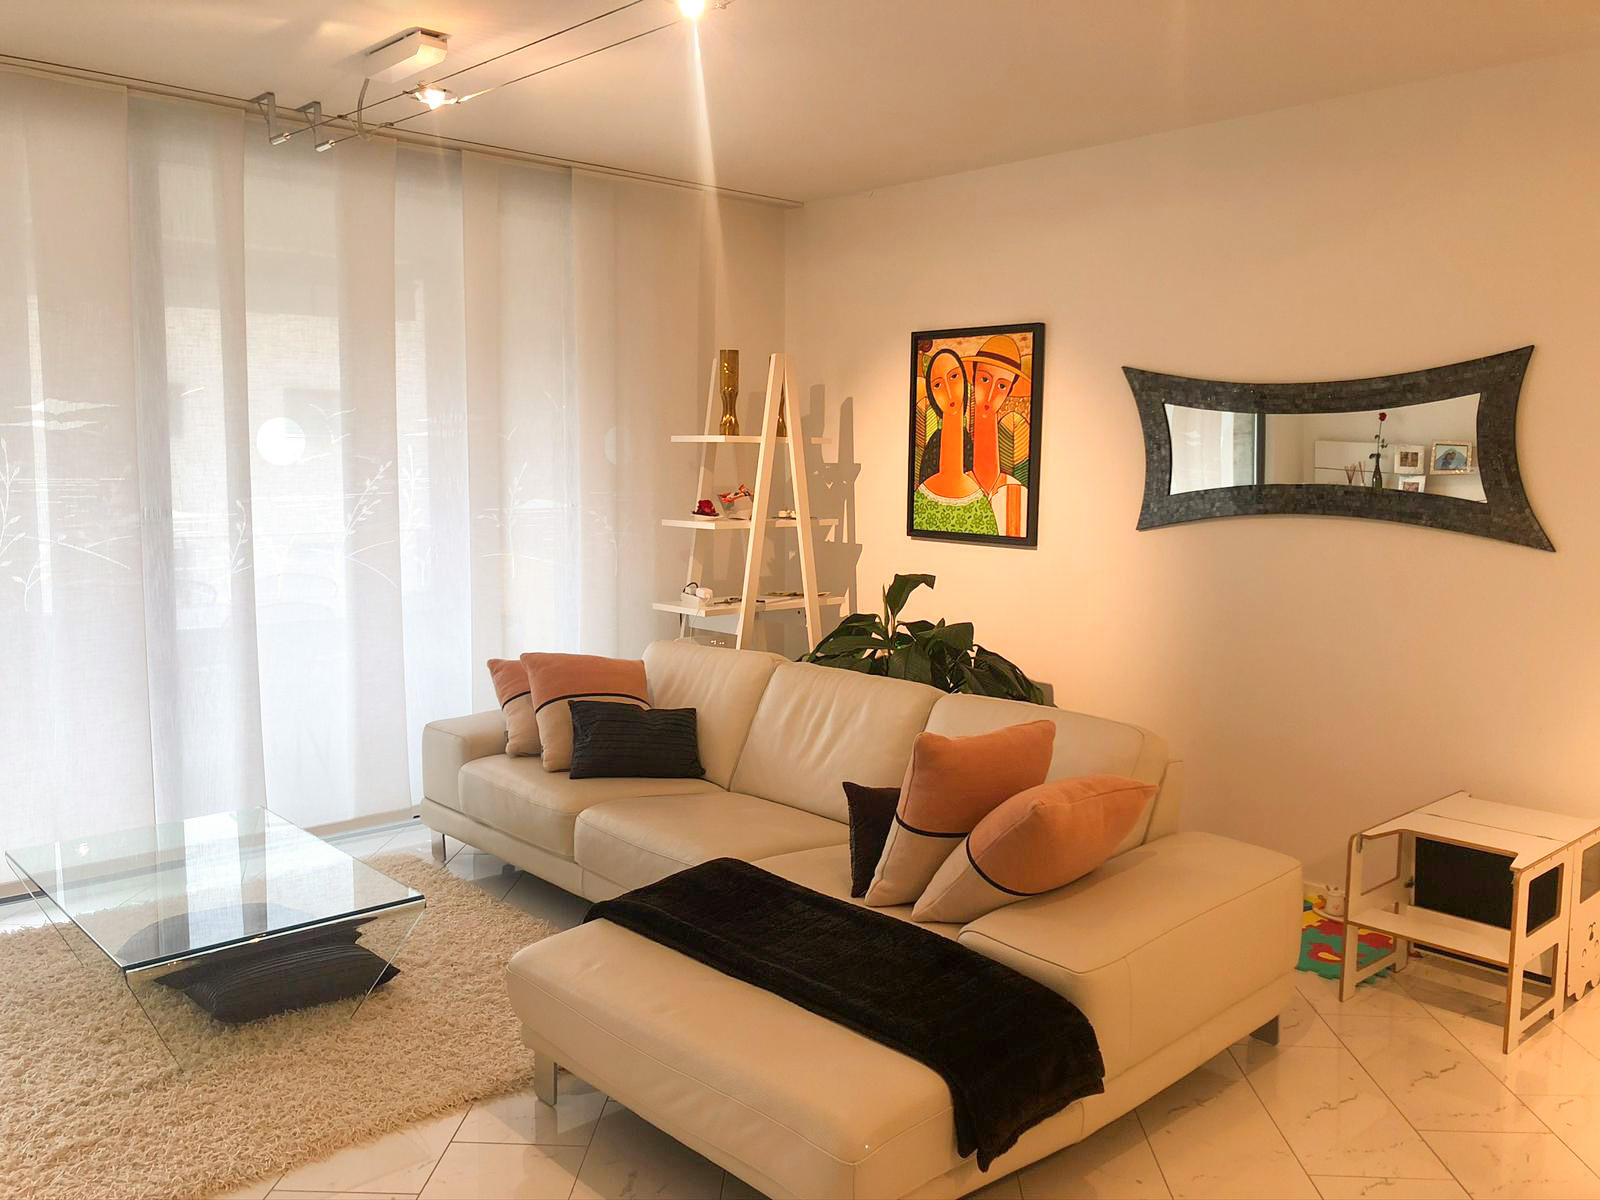 Lugano 6900 TI - Appartement 3.5 pièces - TissoT Immobilier